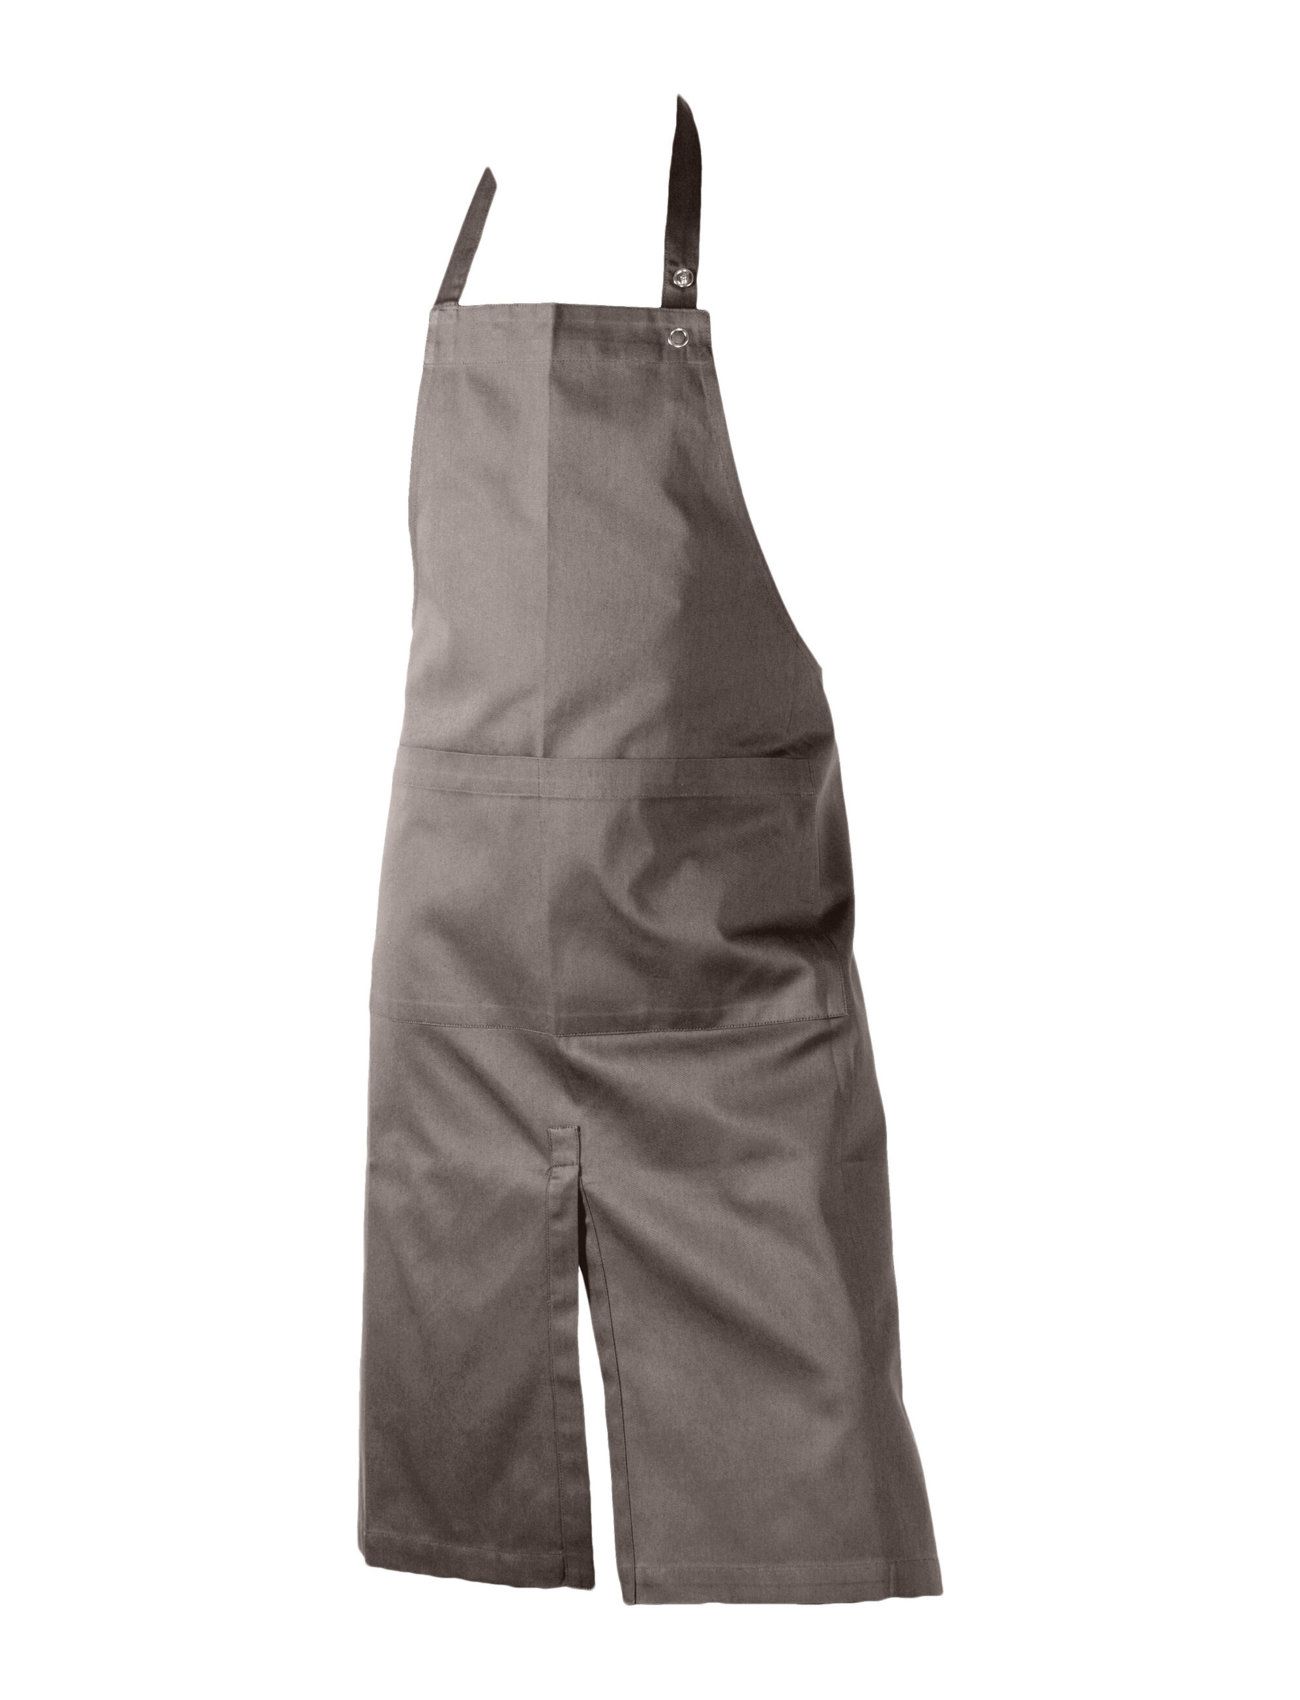 Apron With Pocket Home Textiles Kitchen Textiles Aprons Grey The Organic Company